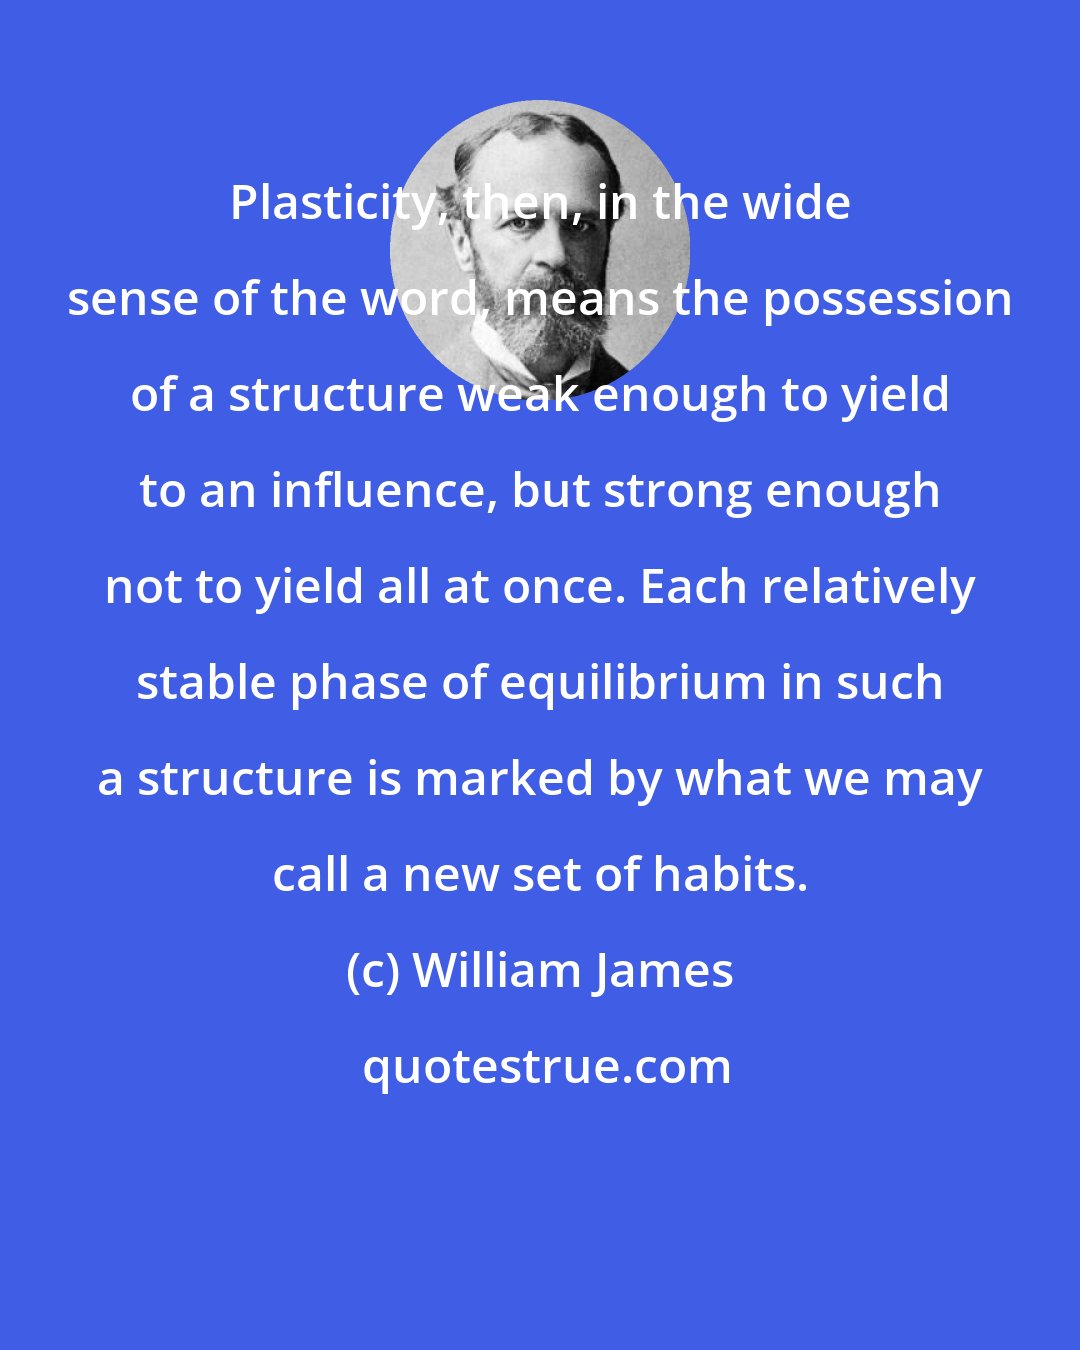 William James: Plasticity, then, in the wide sense of the word, means the possession of a structure weak enough to yield to an influence, but strong enough not to yield all at once. Each relatively stable phase of equilibrium in such a structure is marked by what we may call a new set of habits.